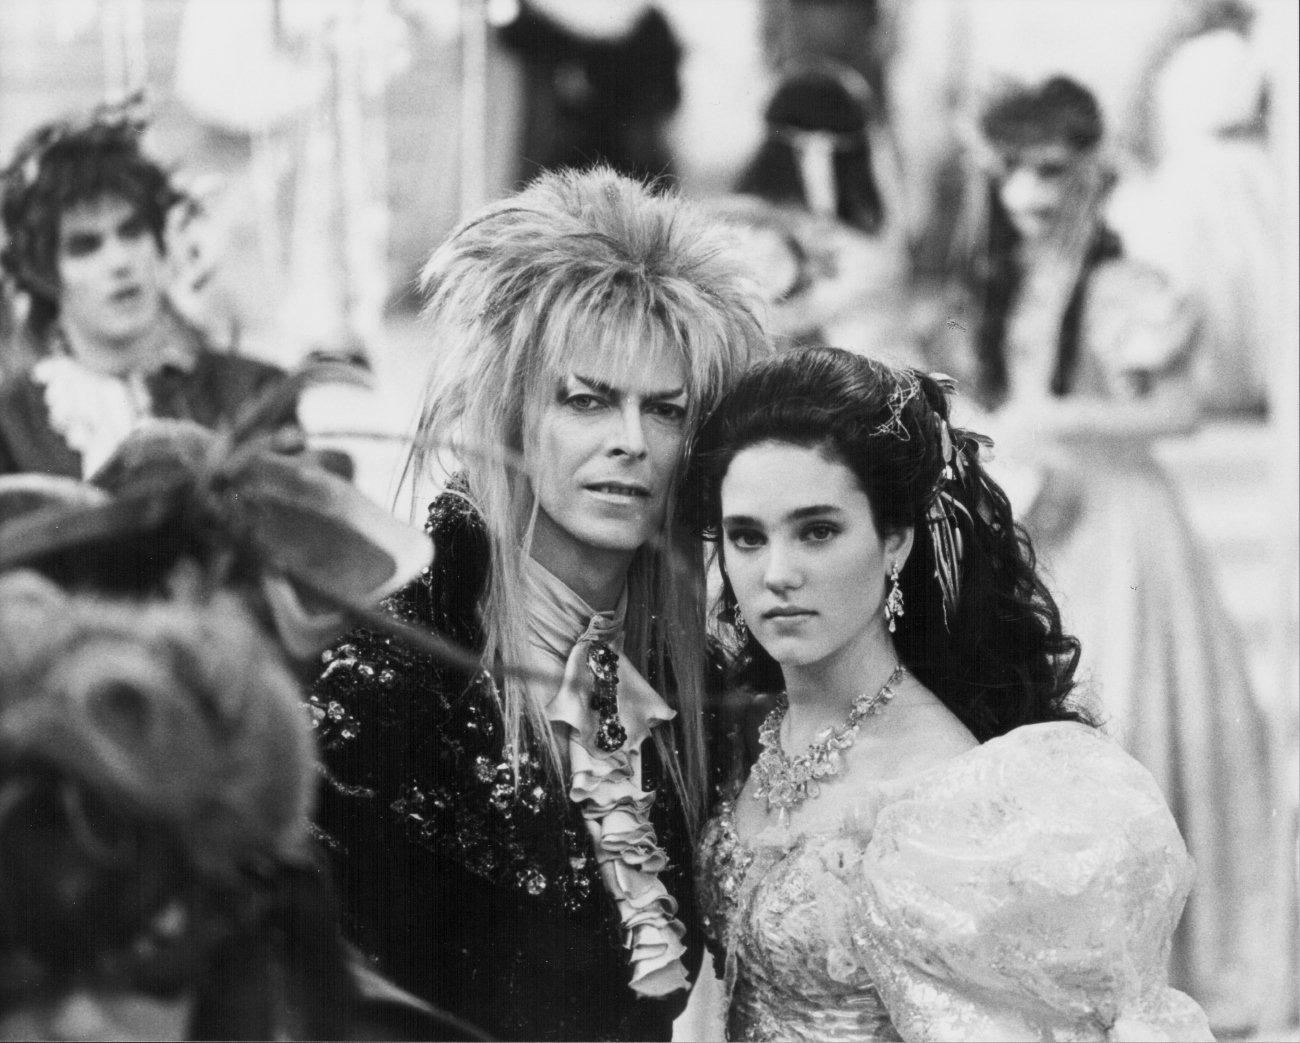 David Bowie and Jennifer Connelly in a scene from the movie 'Labyrinth', 1986